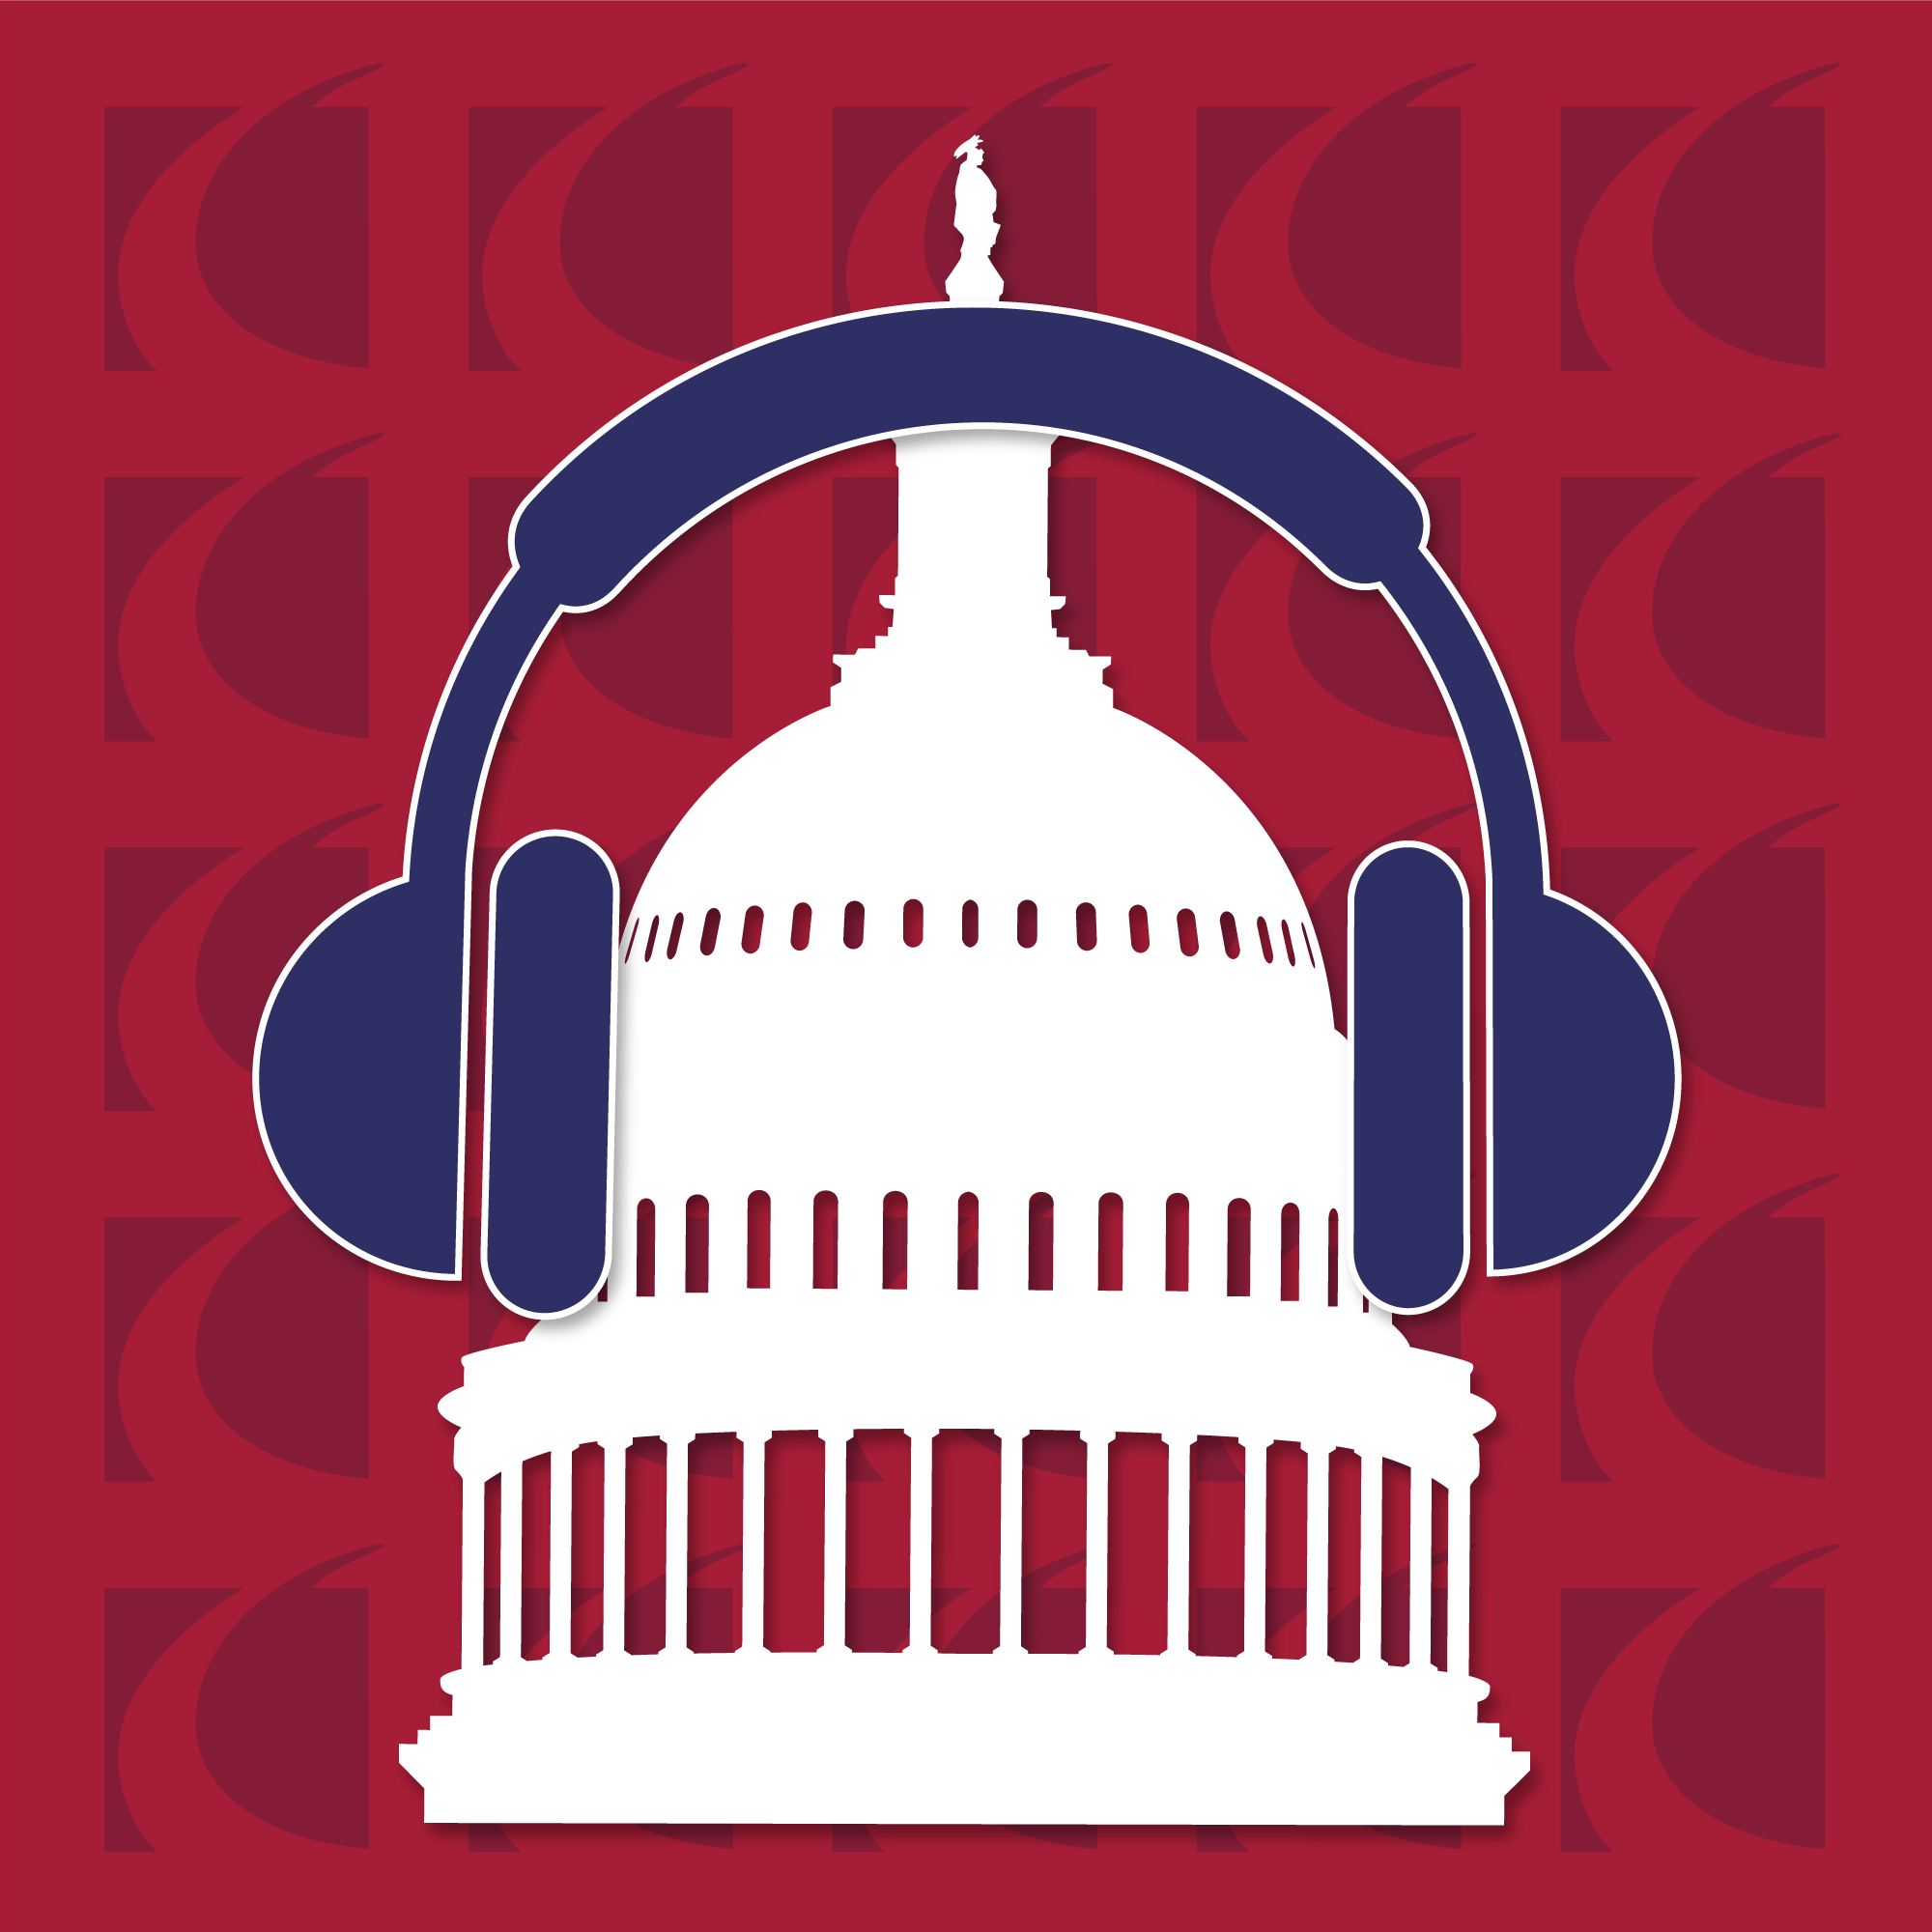 July 29: Fastest 5 Minutes, The Podcast Gov’t Contractors Can’t Do Without - Crowell & Moring LLP